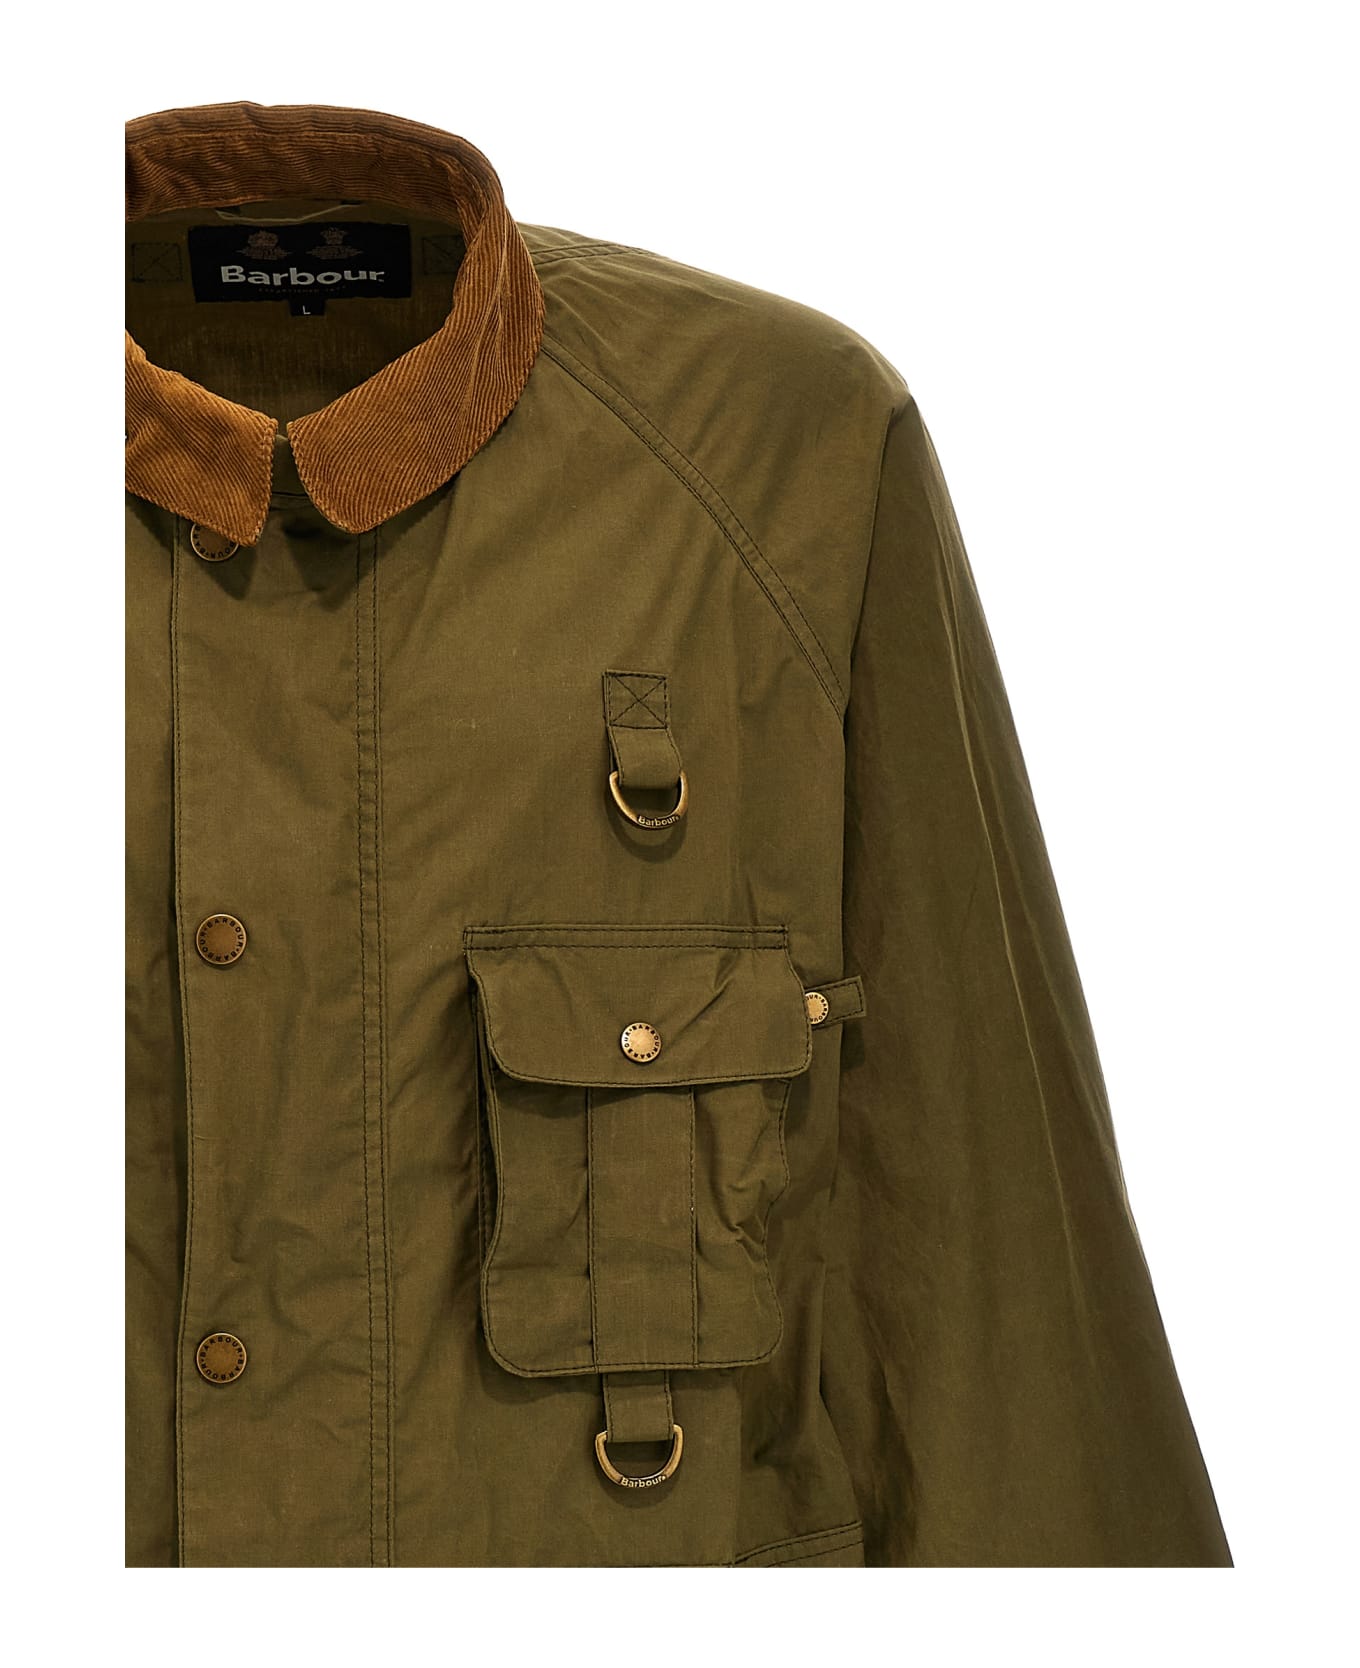 Barbour 'modified Transport' Jacket - Green